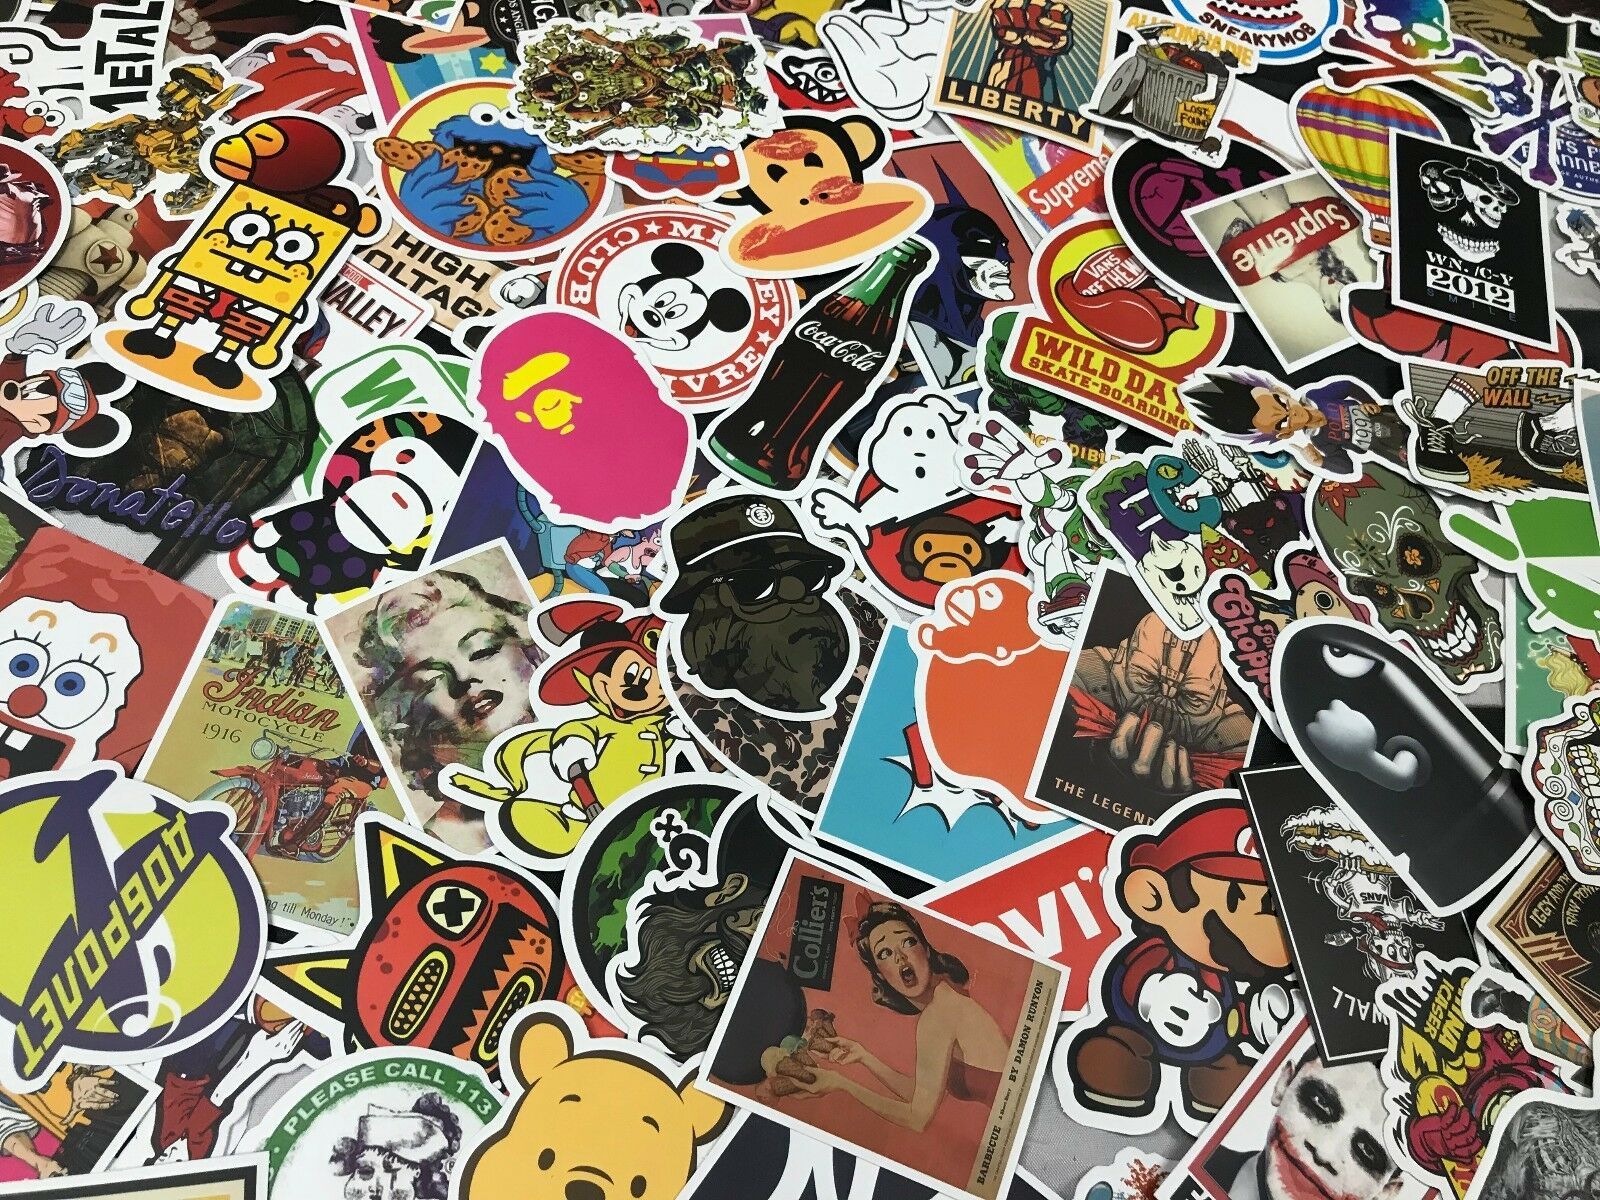 100 SKATEBOARD STICKERS STICKER PACK DECAL BOMB HYPEBEAST LAPTOP SCOOTER 